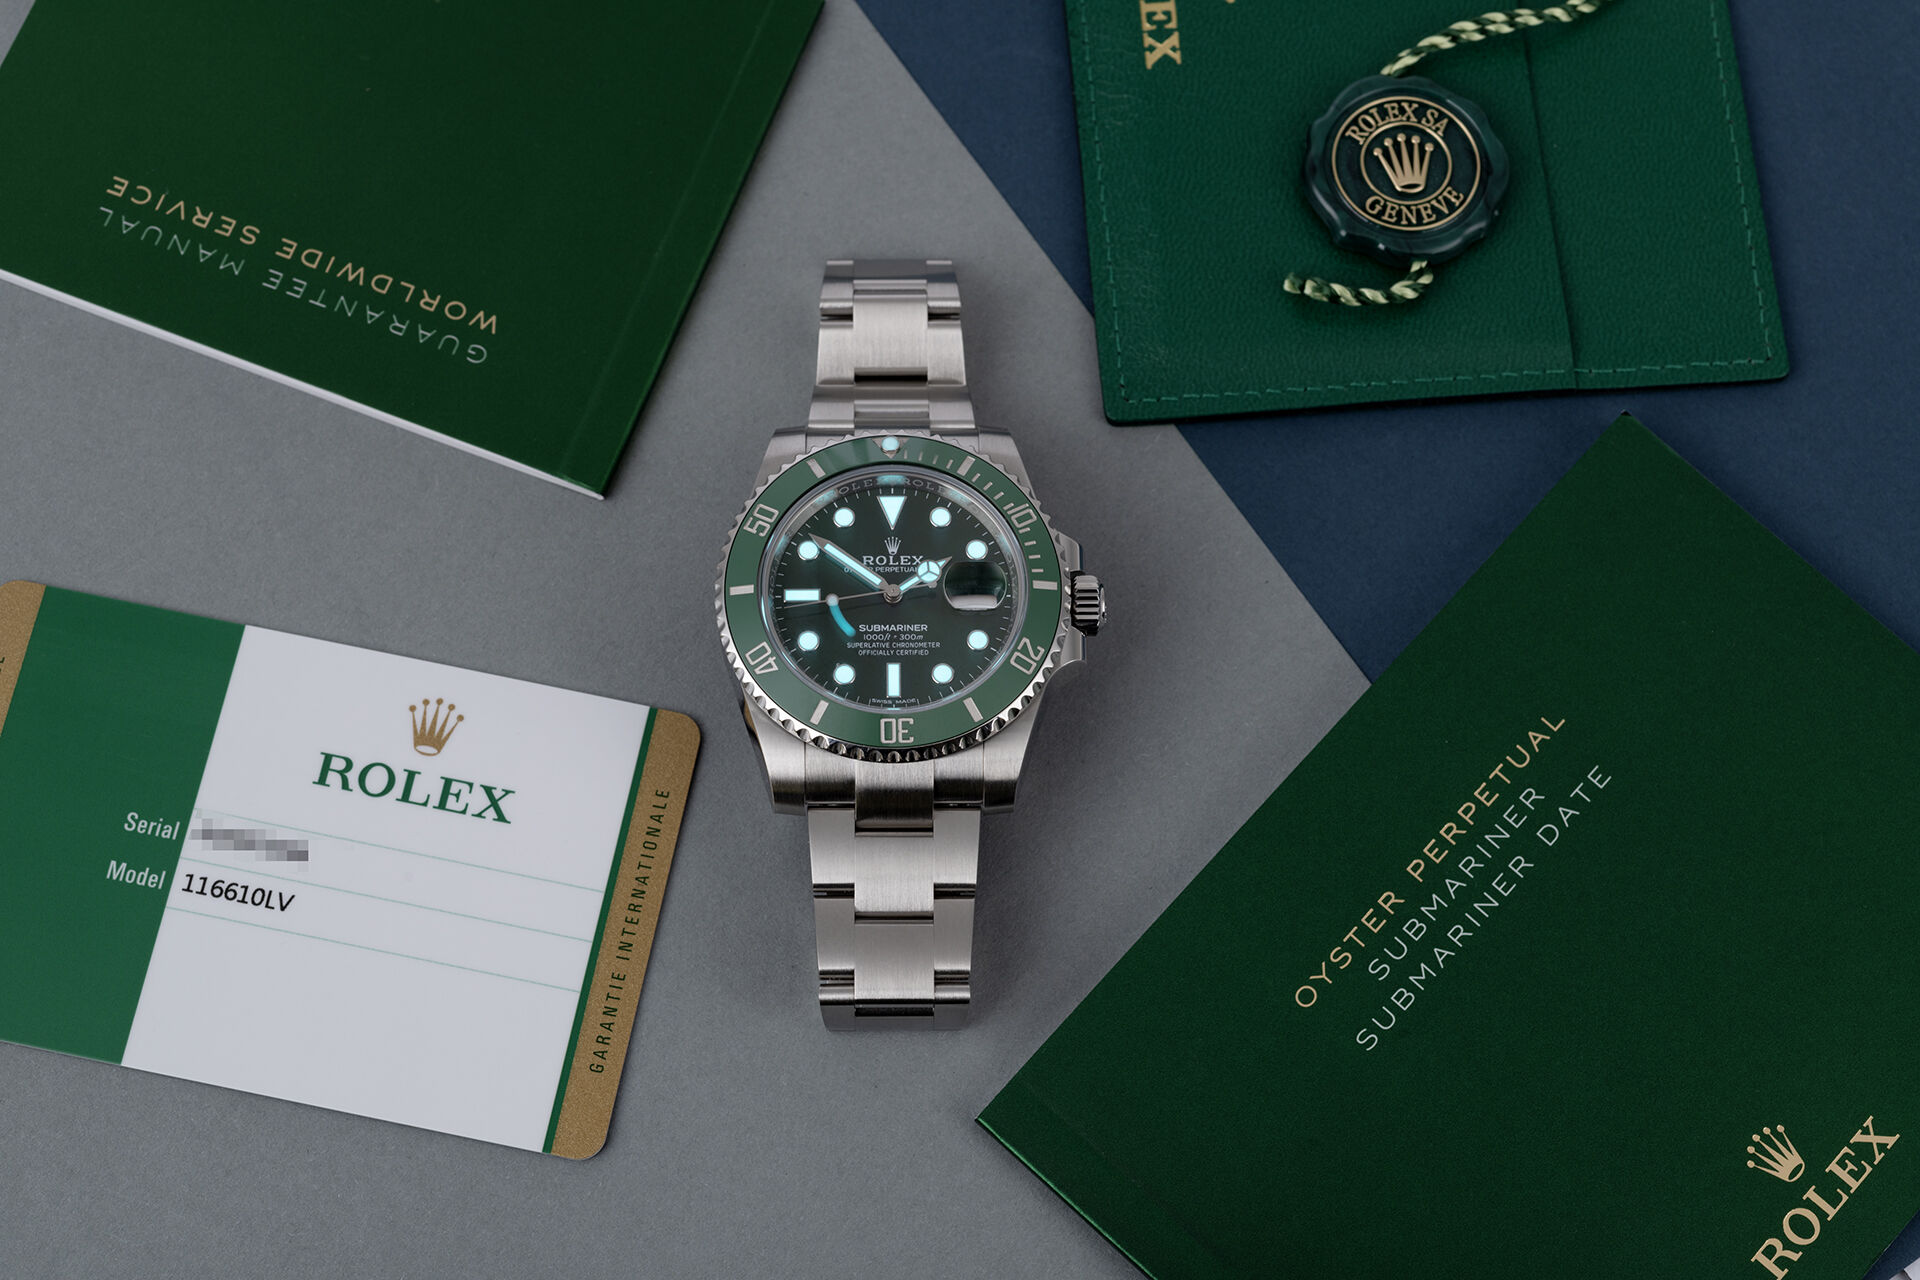 ref 116610LV | Discontinued - UK Purchased | Rolex Submariner Date